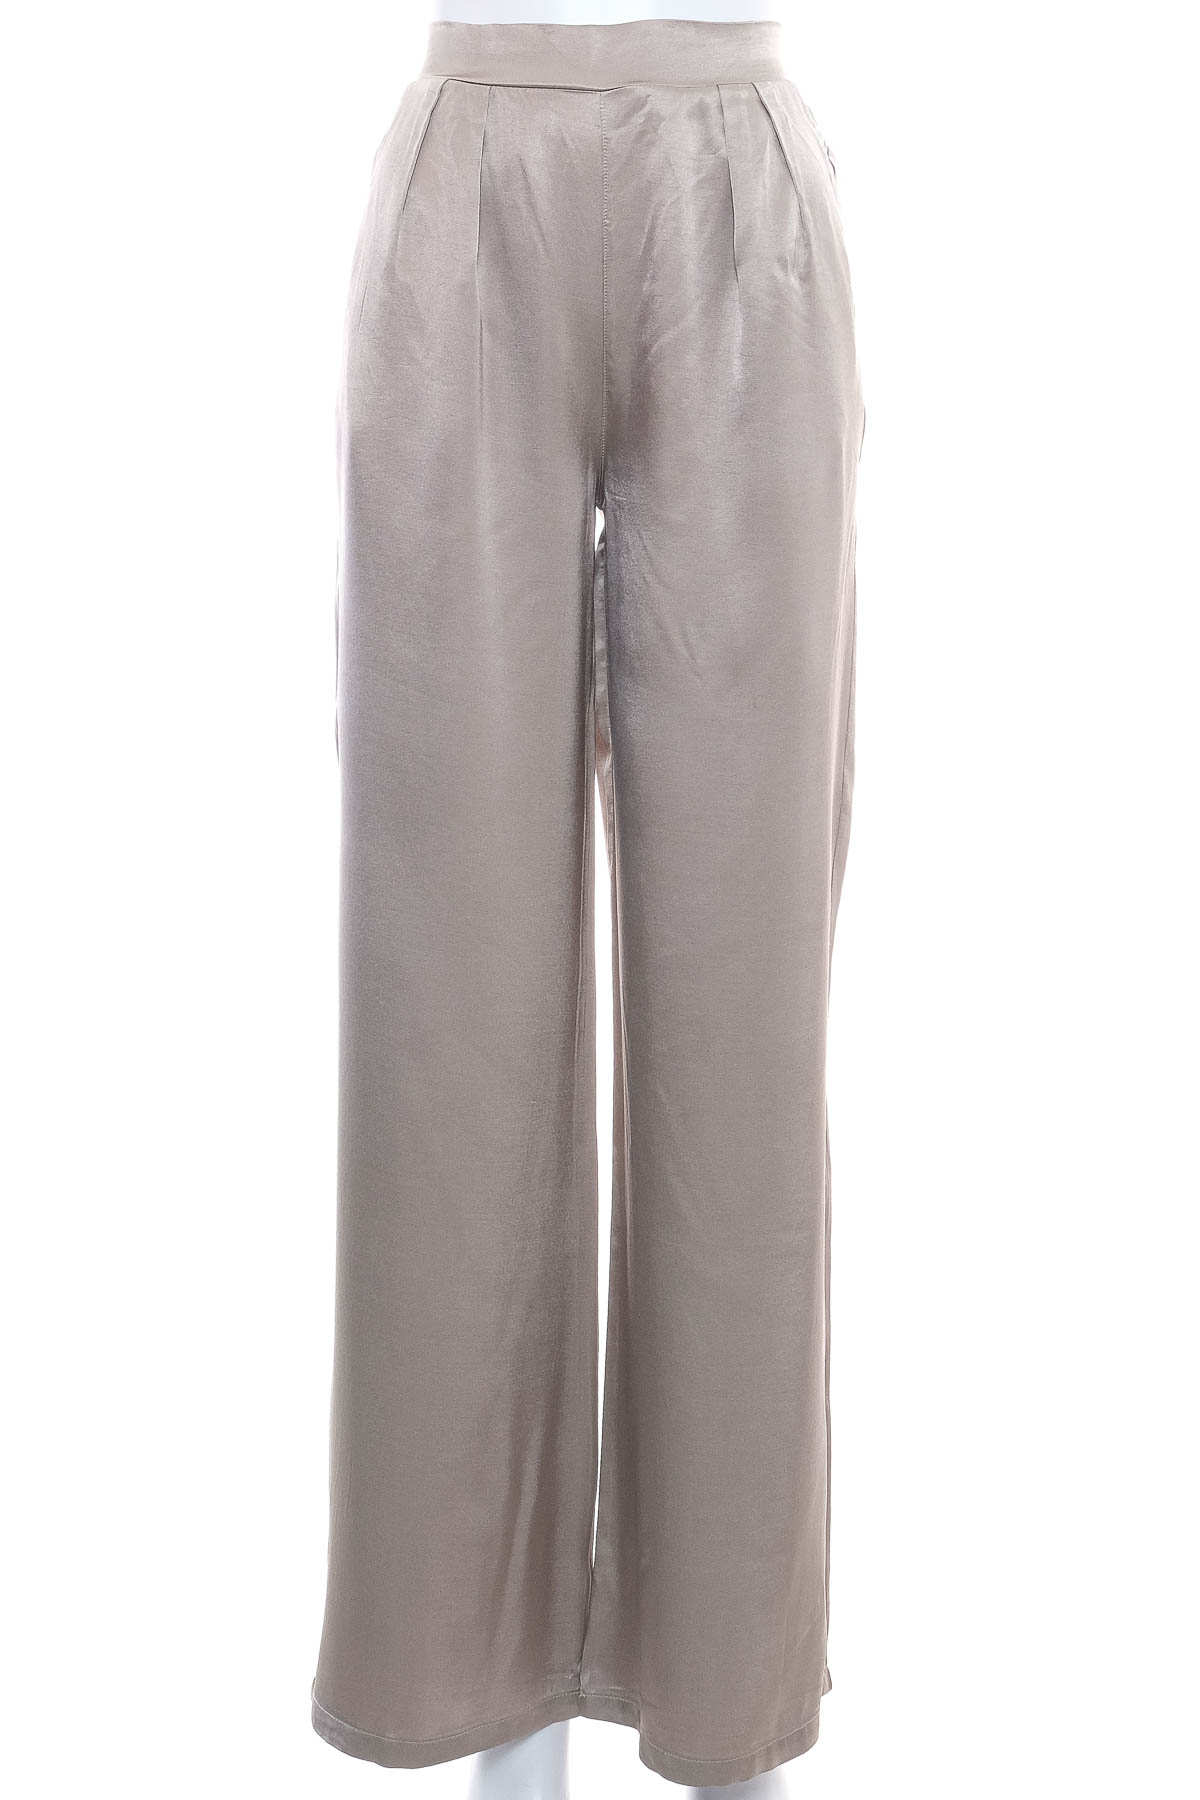 Women's trousers - More & More - 0